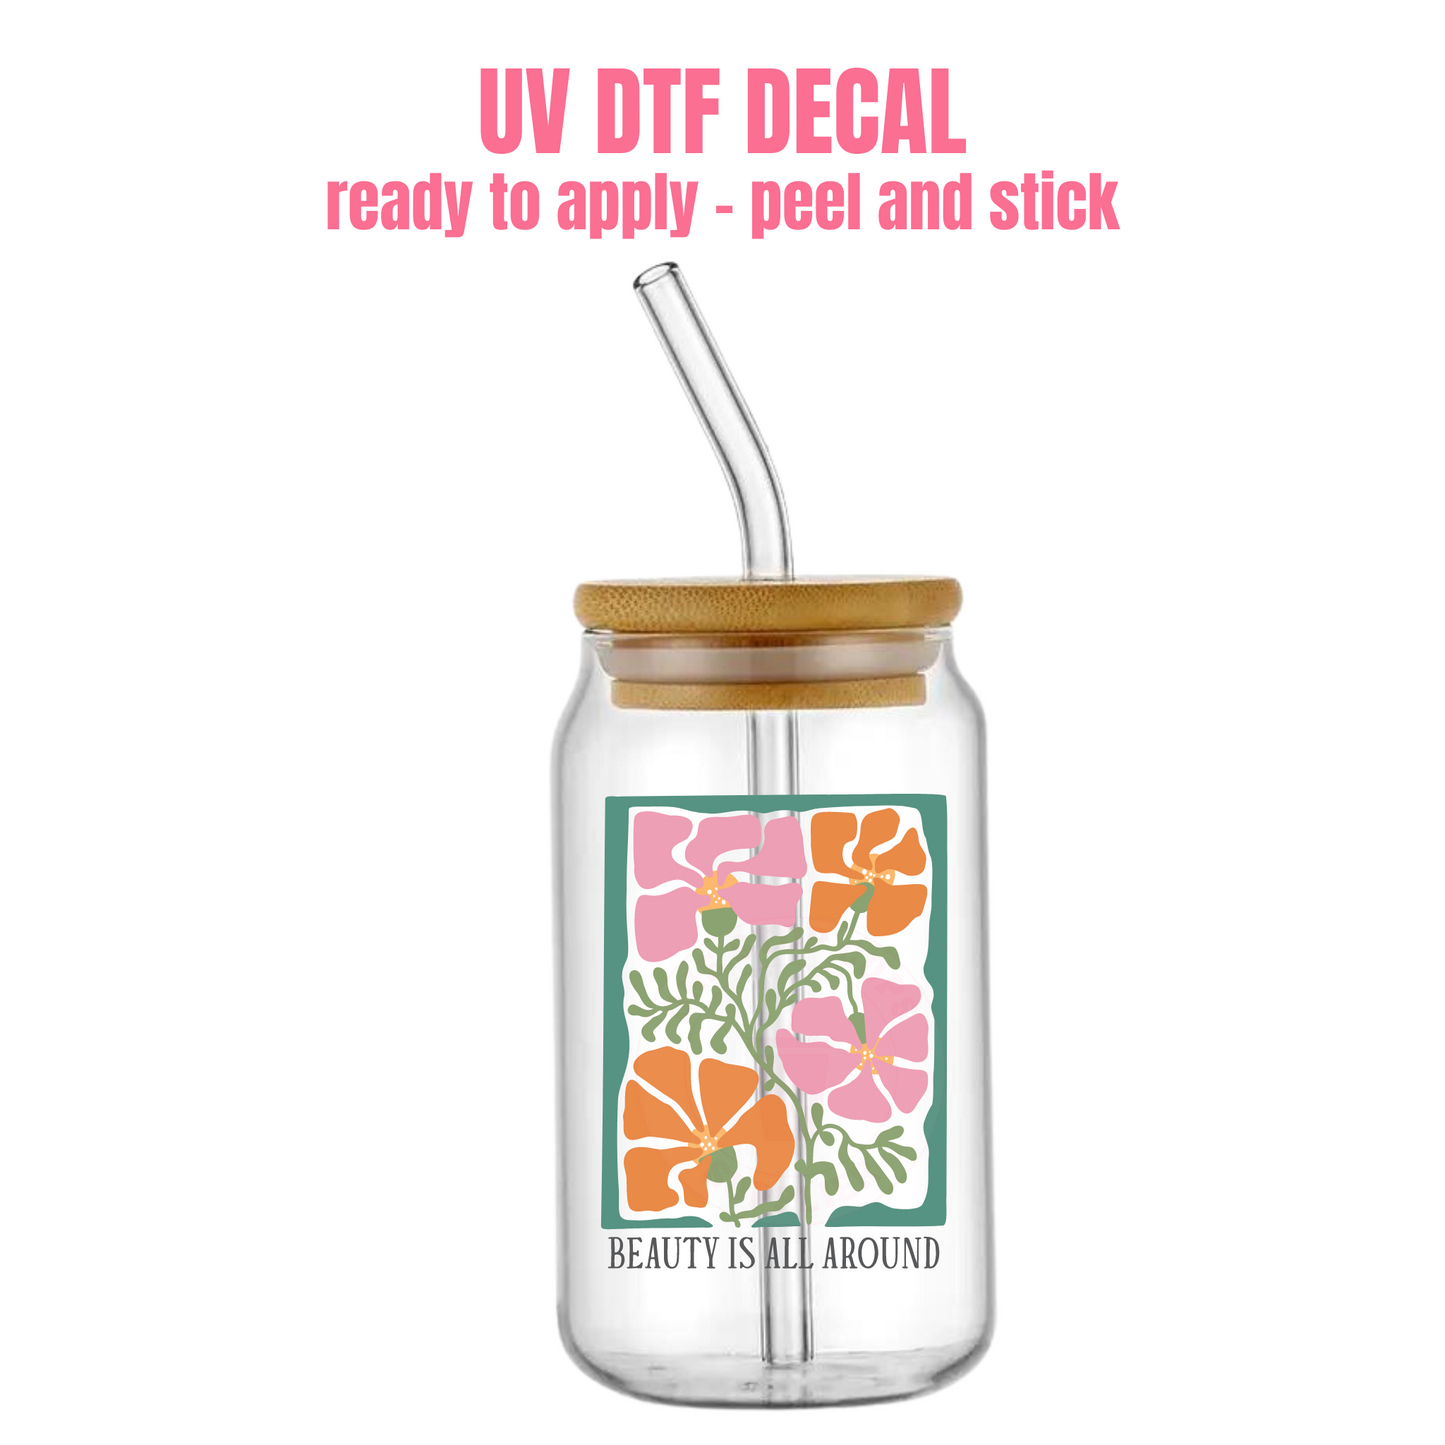 UV DTF DECAL #162